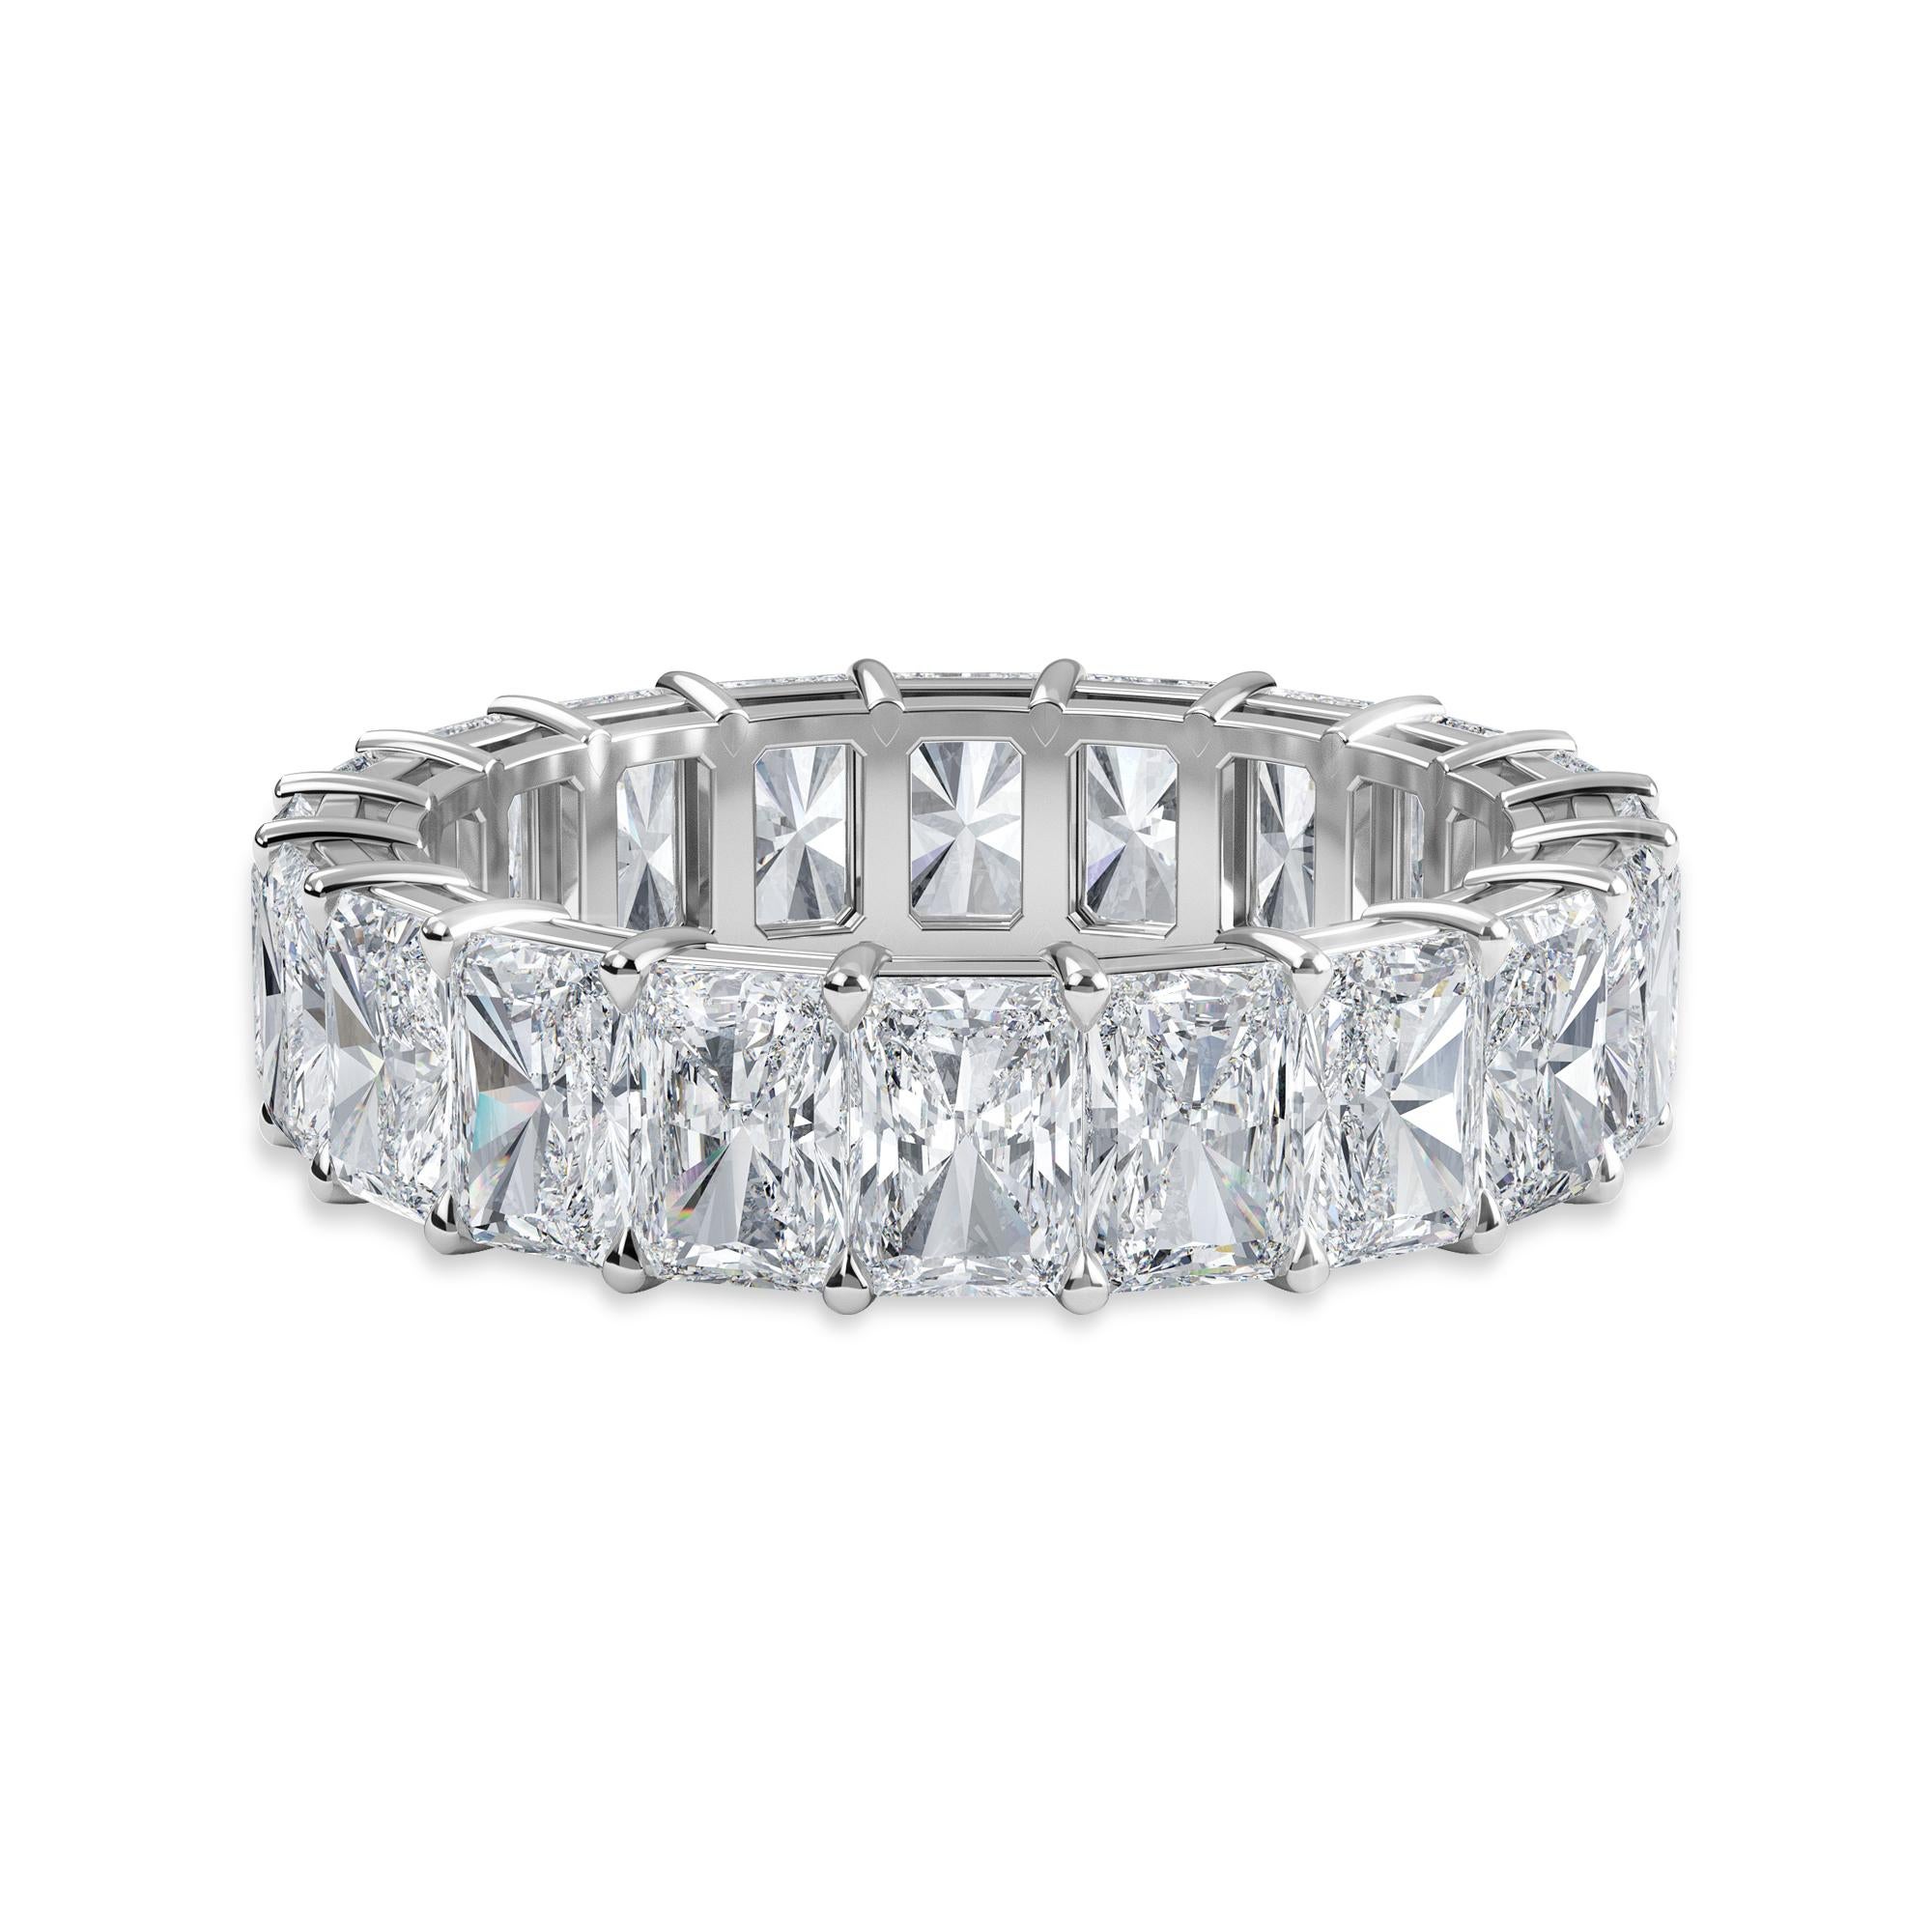 This Radiant Eternity Band features 20 Radiant Diamonds, weighing 6.20 Total Carat Weight. The stones are F Color, and VS Clarity. This ring is set in Platinum, in a shared prong, comfort fit setting. 